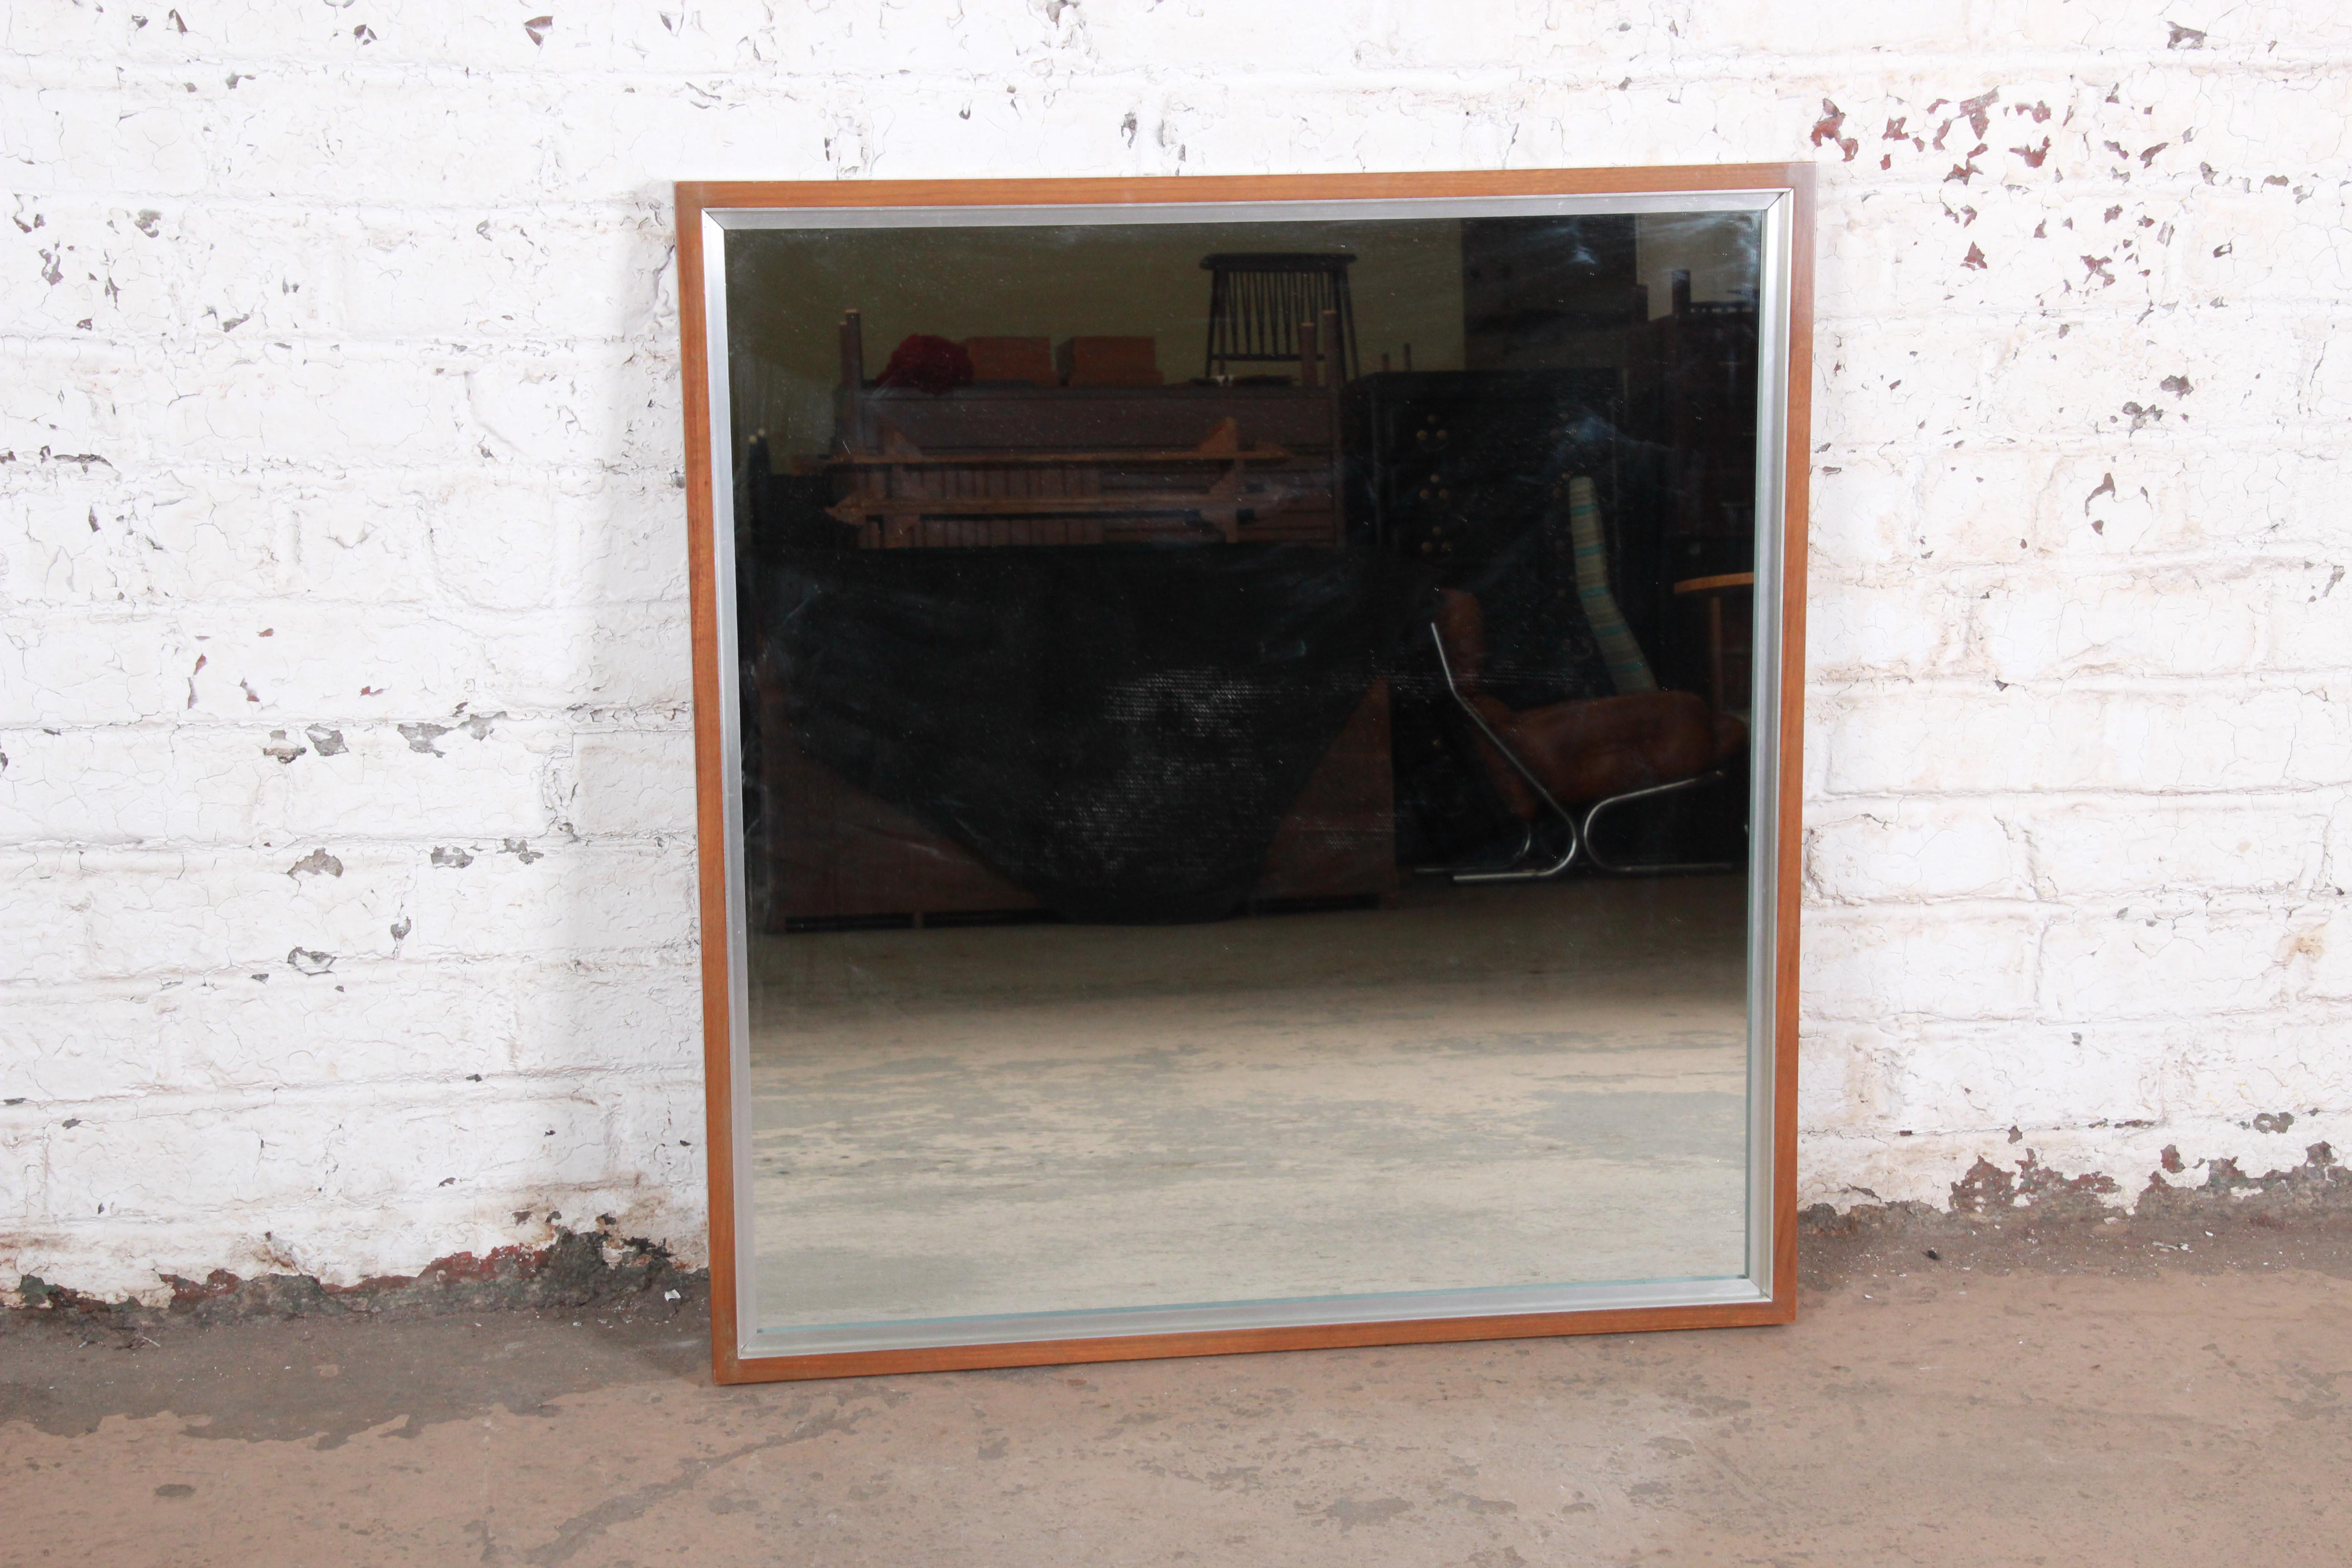 A gorgeous Mid-Century Modern wall mirror designed by Paul McCobb for his Linear Group line for Calvin Furniture. The mirror features a heavy walnut frame with aluminum trim. Can be hung vertically or horizontally. The mirror is in very good